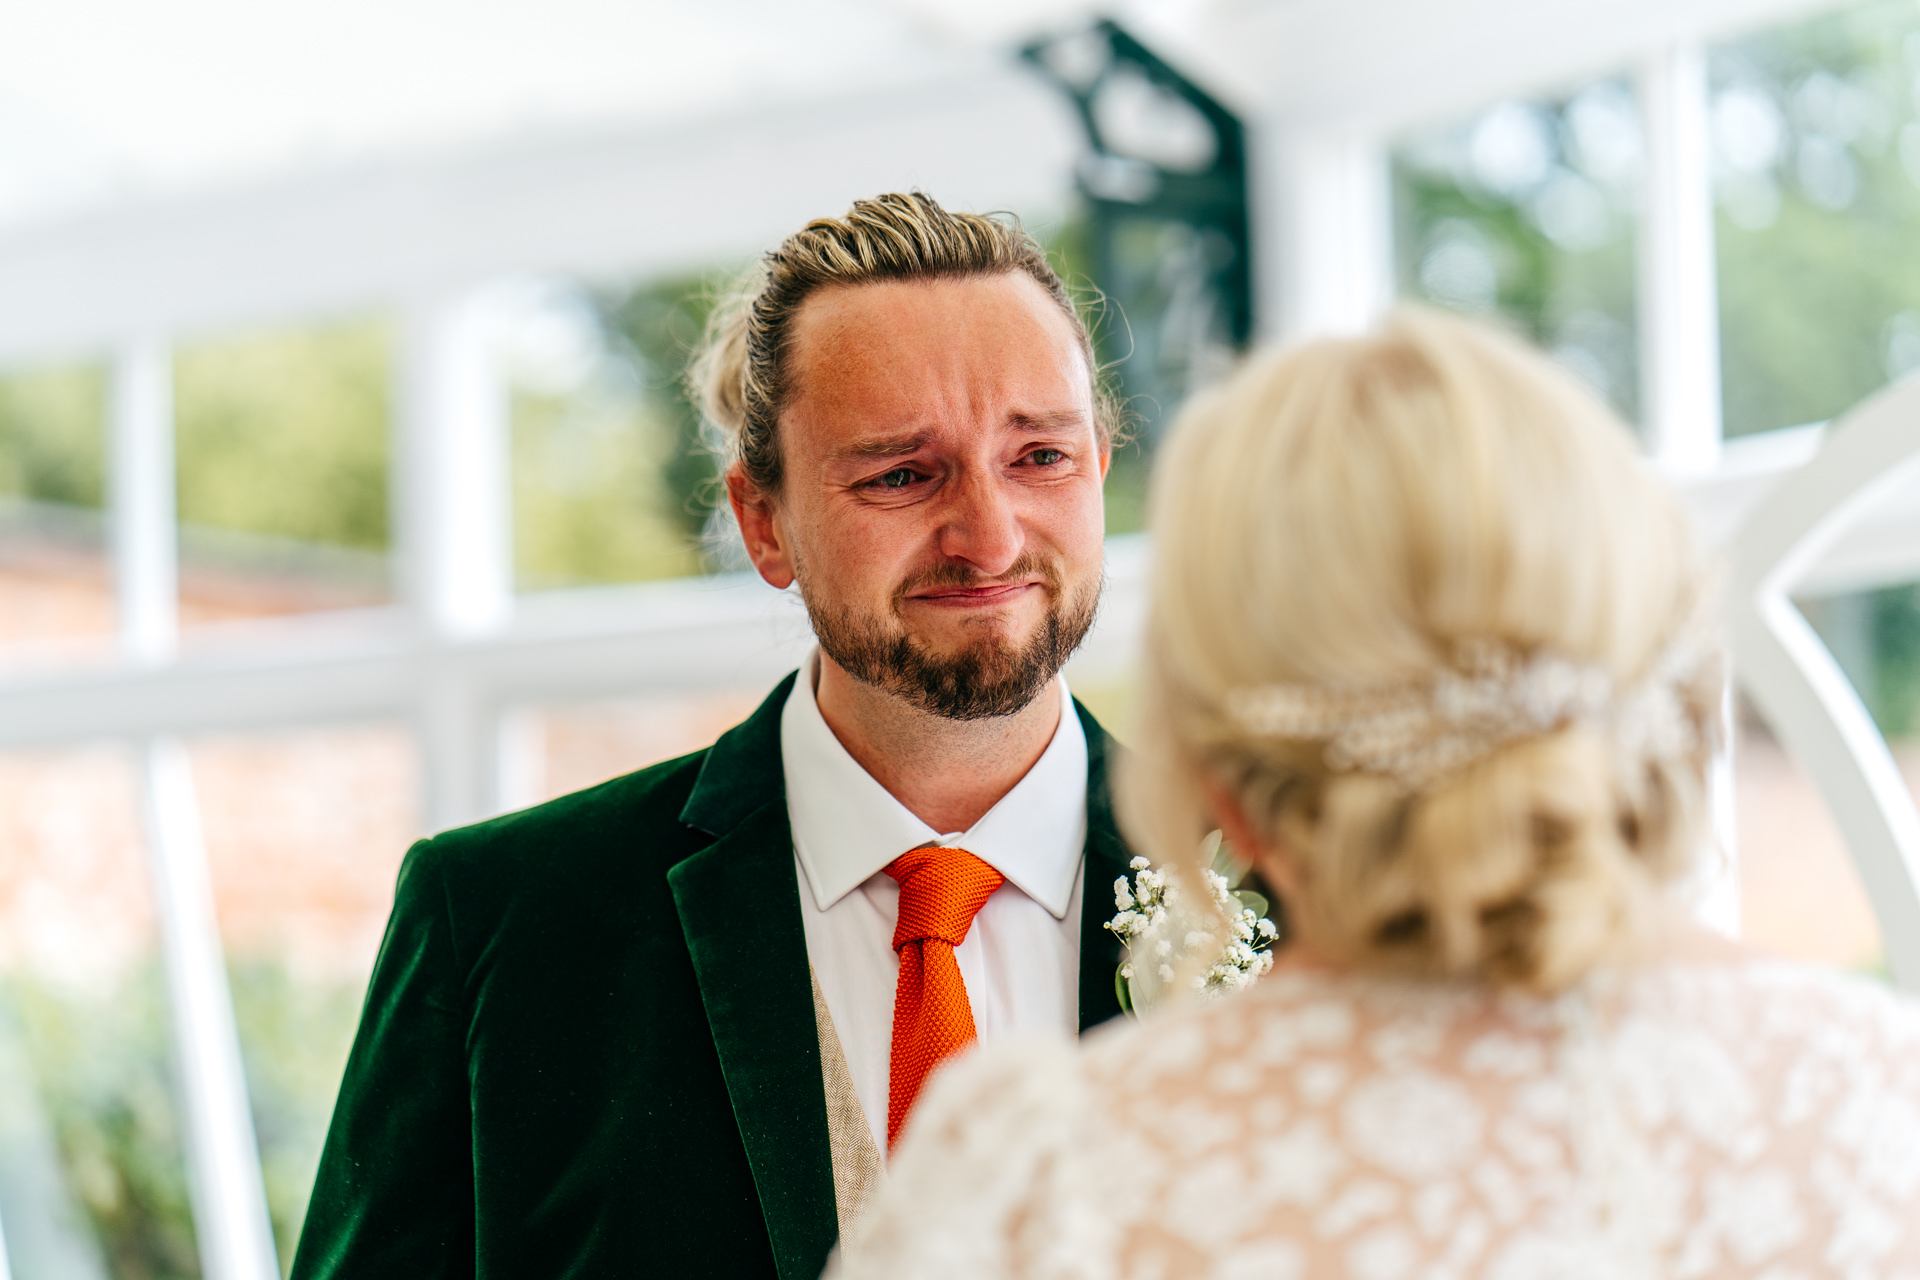 Super emotional groom during ceremony in the glasshouse at Combermere Abbey Wedding